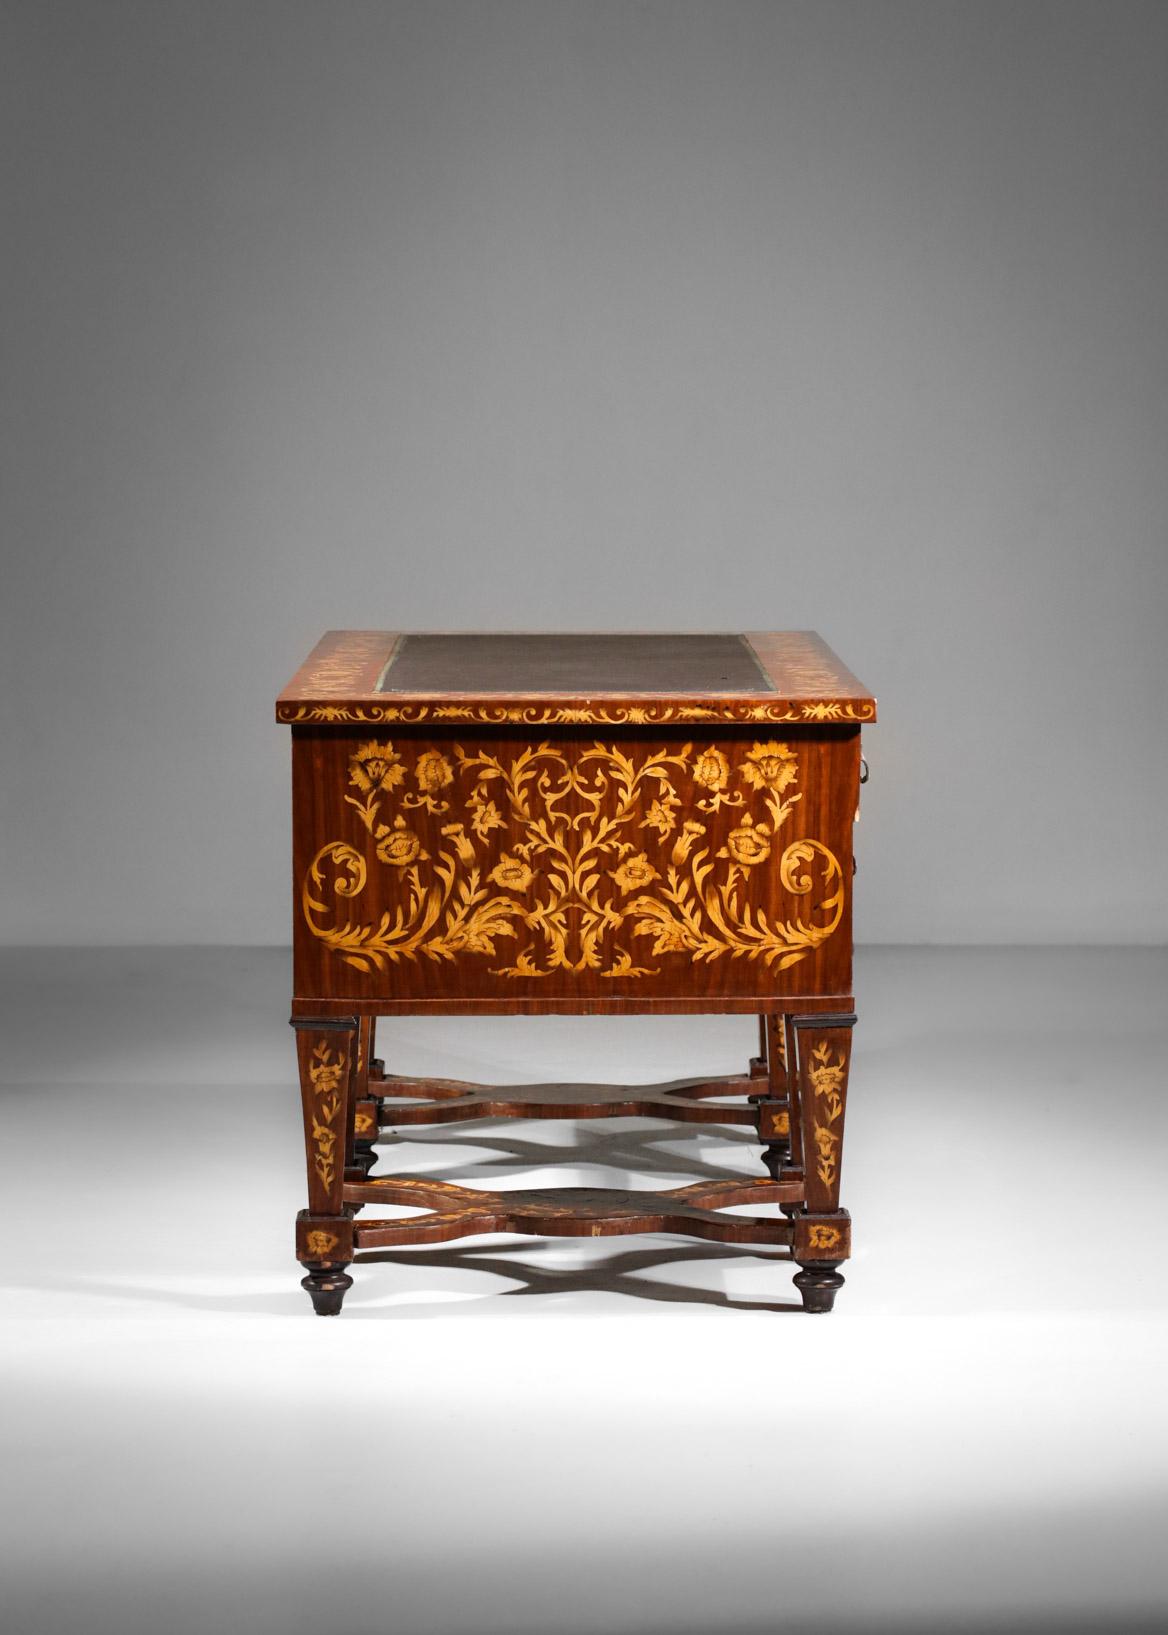 Mazarin Style Desk in Solid Wood and Floral Marquetry, F419 5